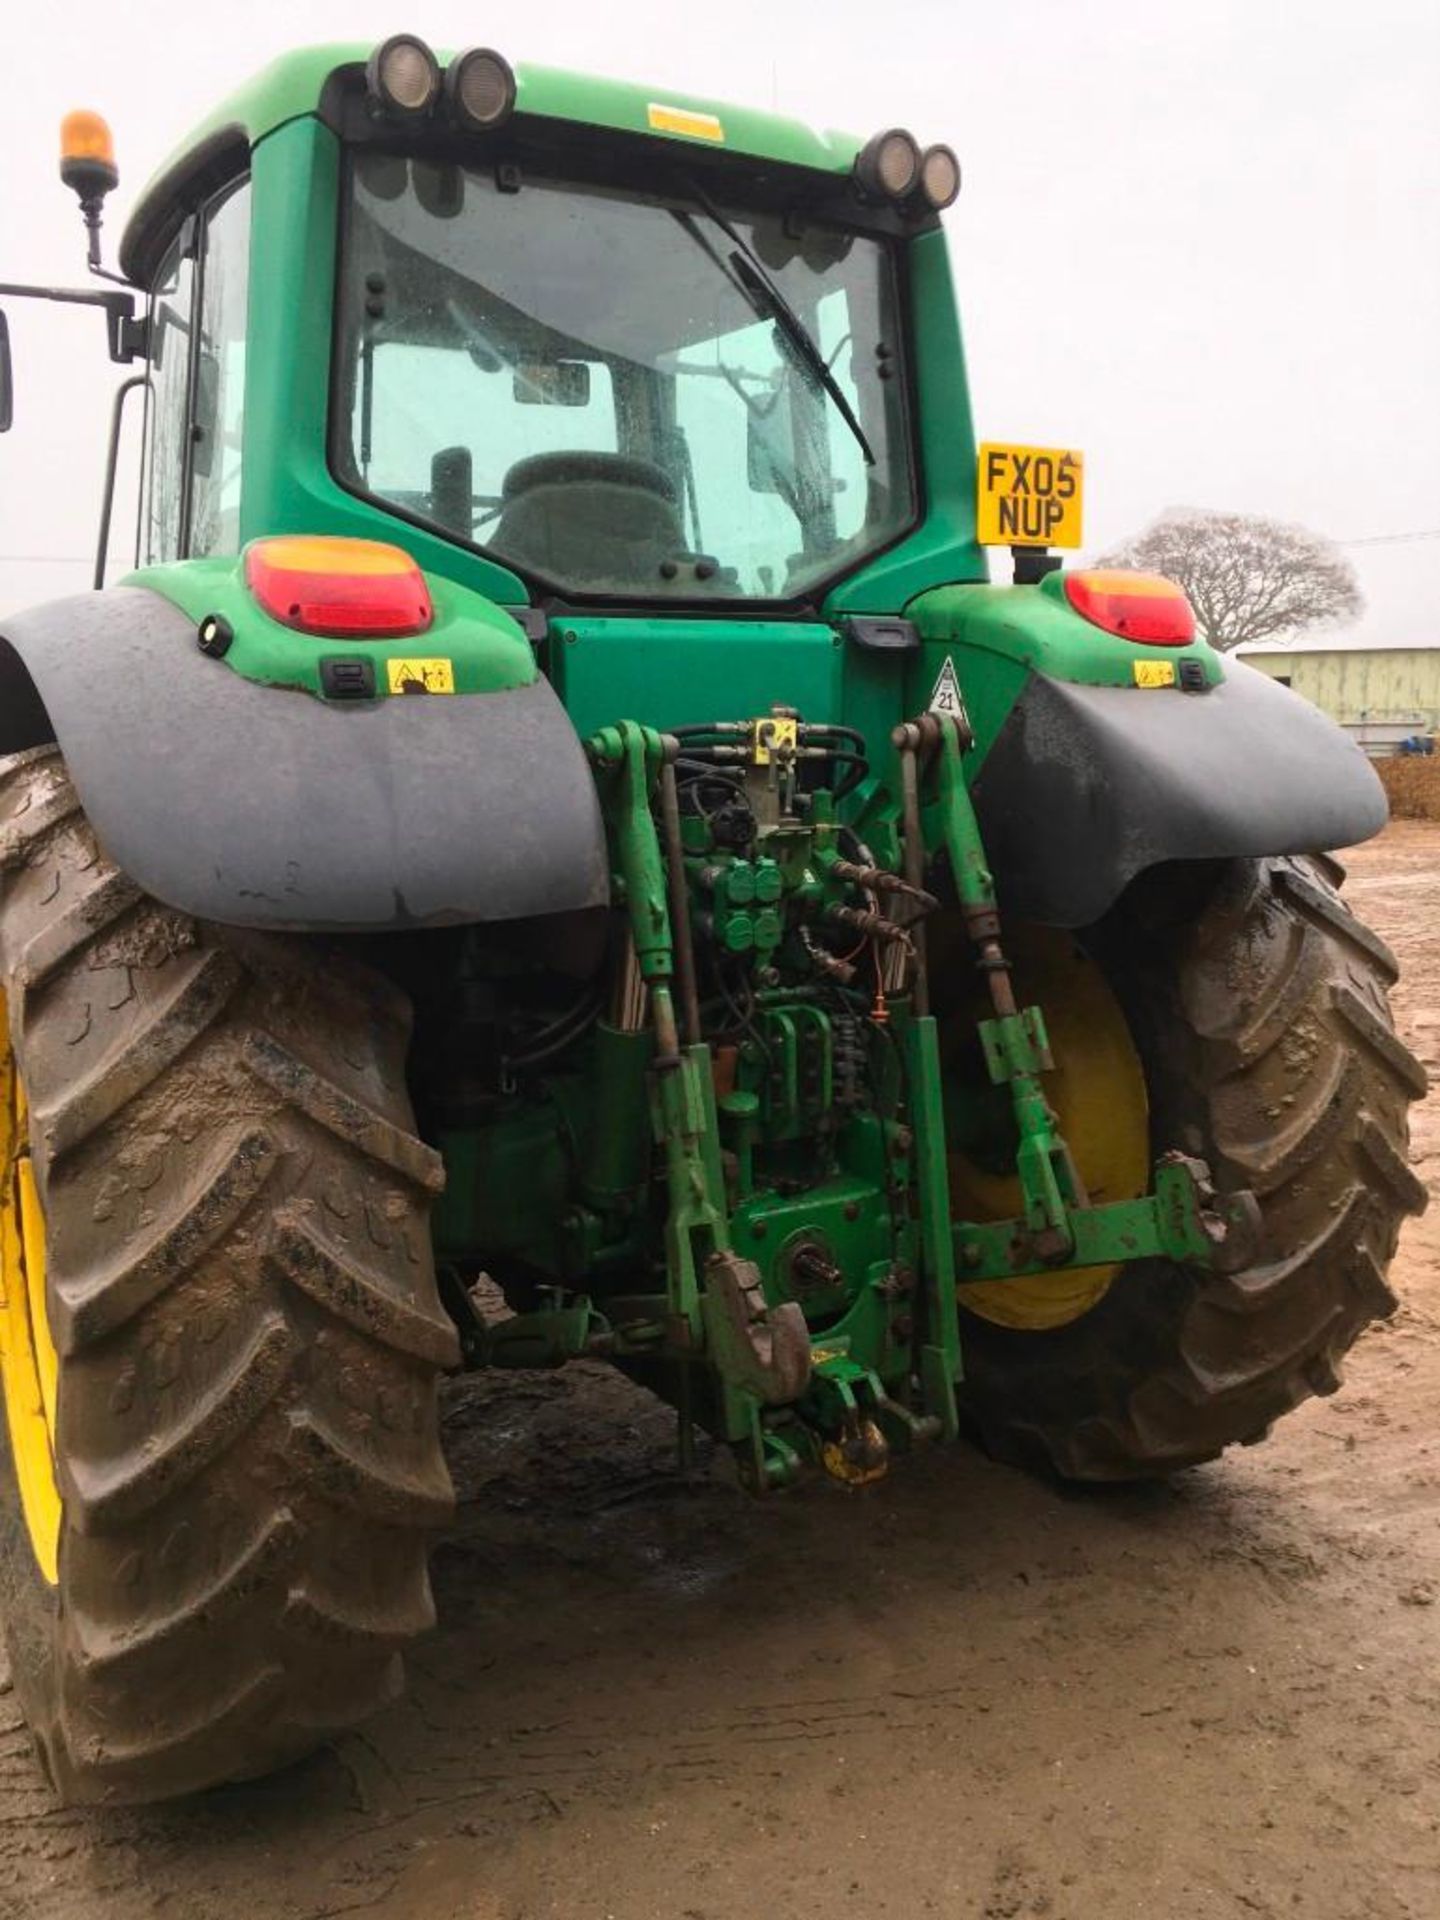 2005 John Deere 6920 40kph tractor with Power Quad gear box, 2 rear spool valves, front and rear lin - Image 7 of 9